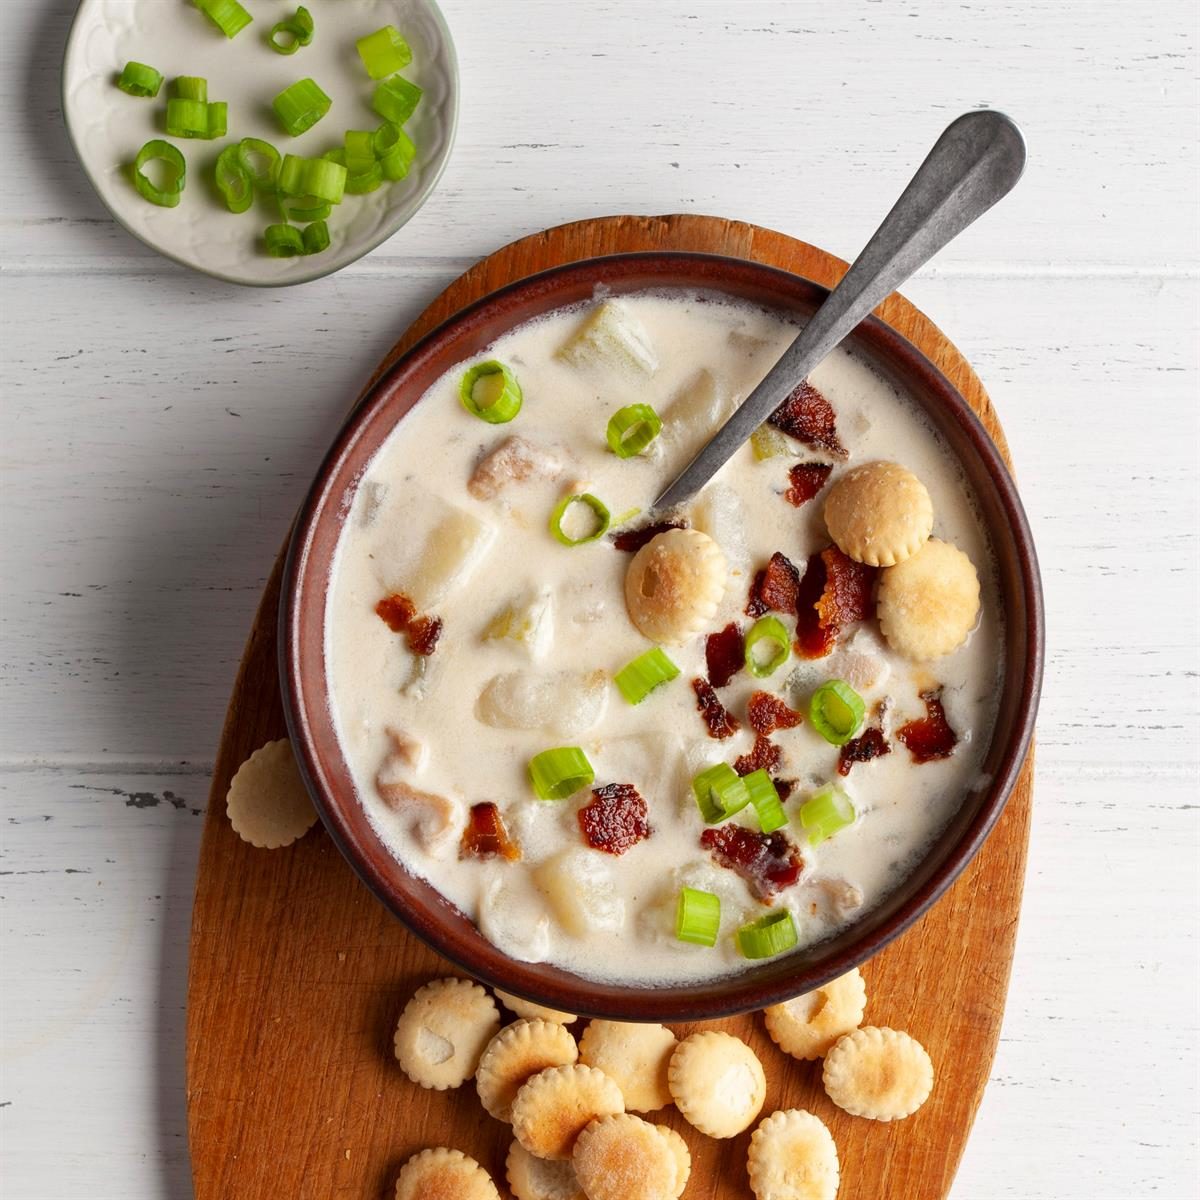 https://www.tasteofhome.com/wp-content/uploads/2018/01/Contest-Winning-New-England-Clam-Chowder_EXPS_FT20_41095_F_0623_1-8.jpg